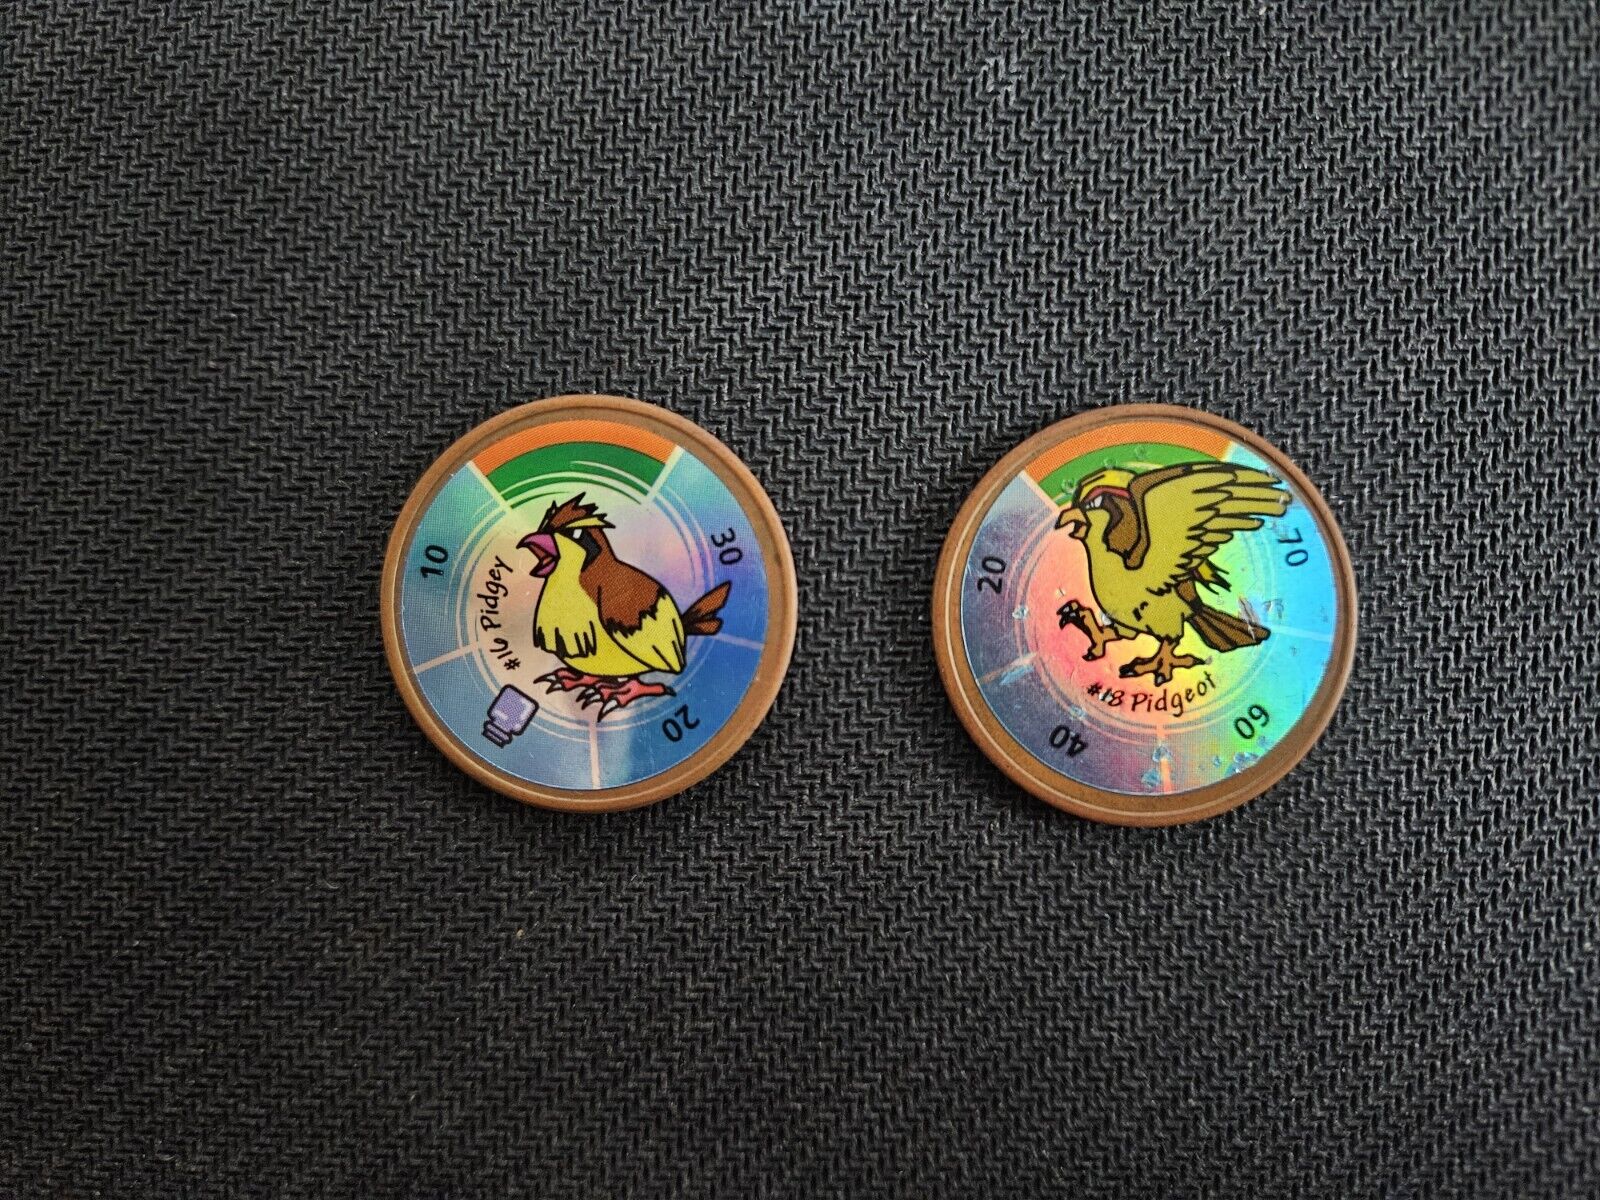 Vintage 1999 Hasbro Pokémon Battling Coin Game Pidgey And Pidgeot #16 And #18